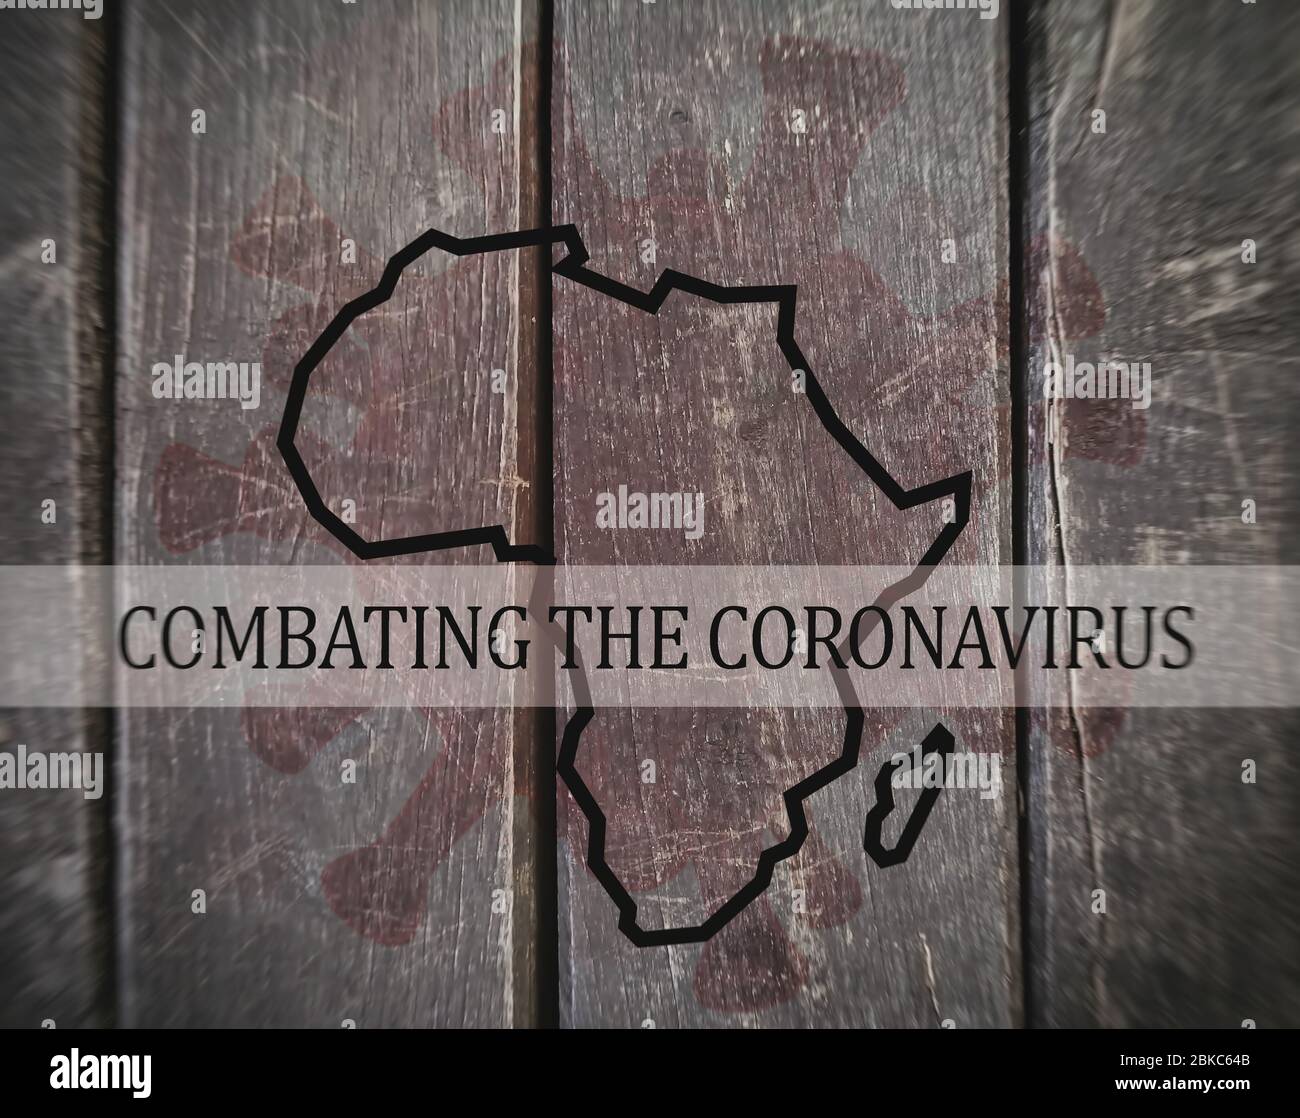 COMBATING THE CORONAVIRUS, Map of Africa on a dirty wooden background, blurred image. Stock Photo